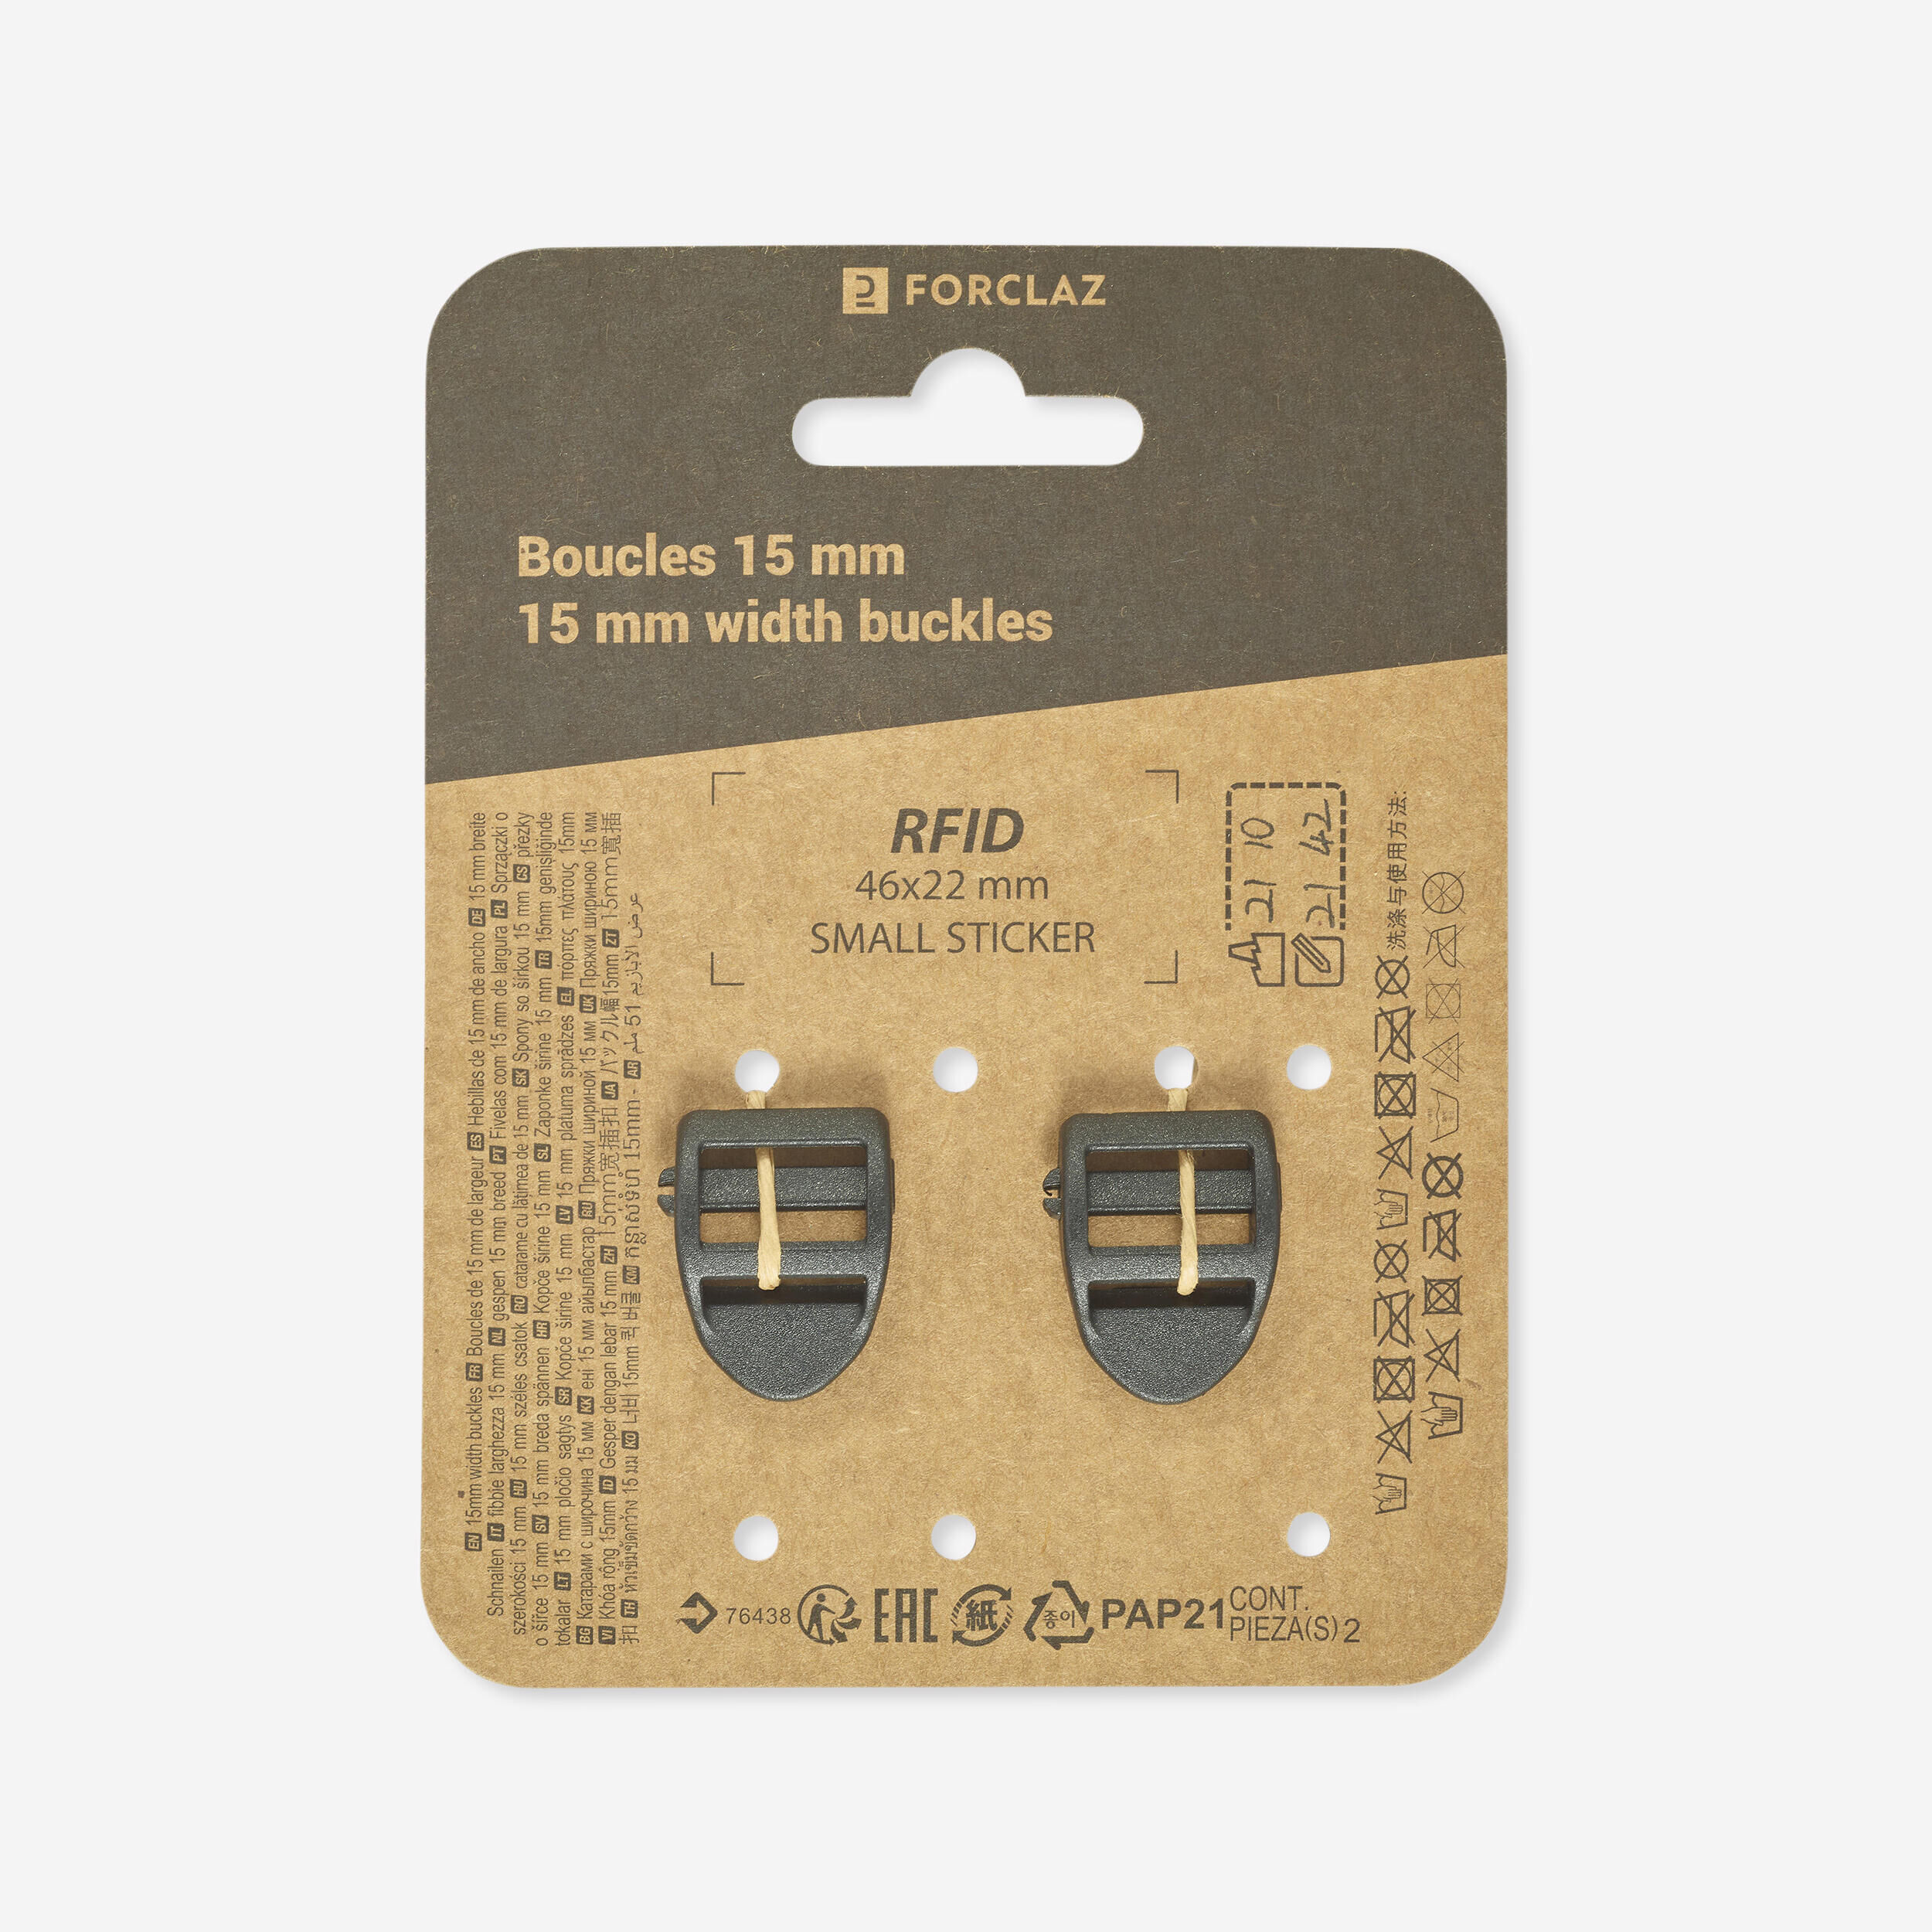 FORCLAZ 2 Clamps 15mm - pin lock